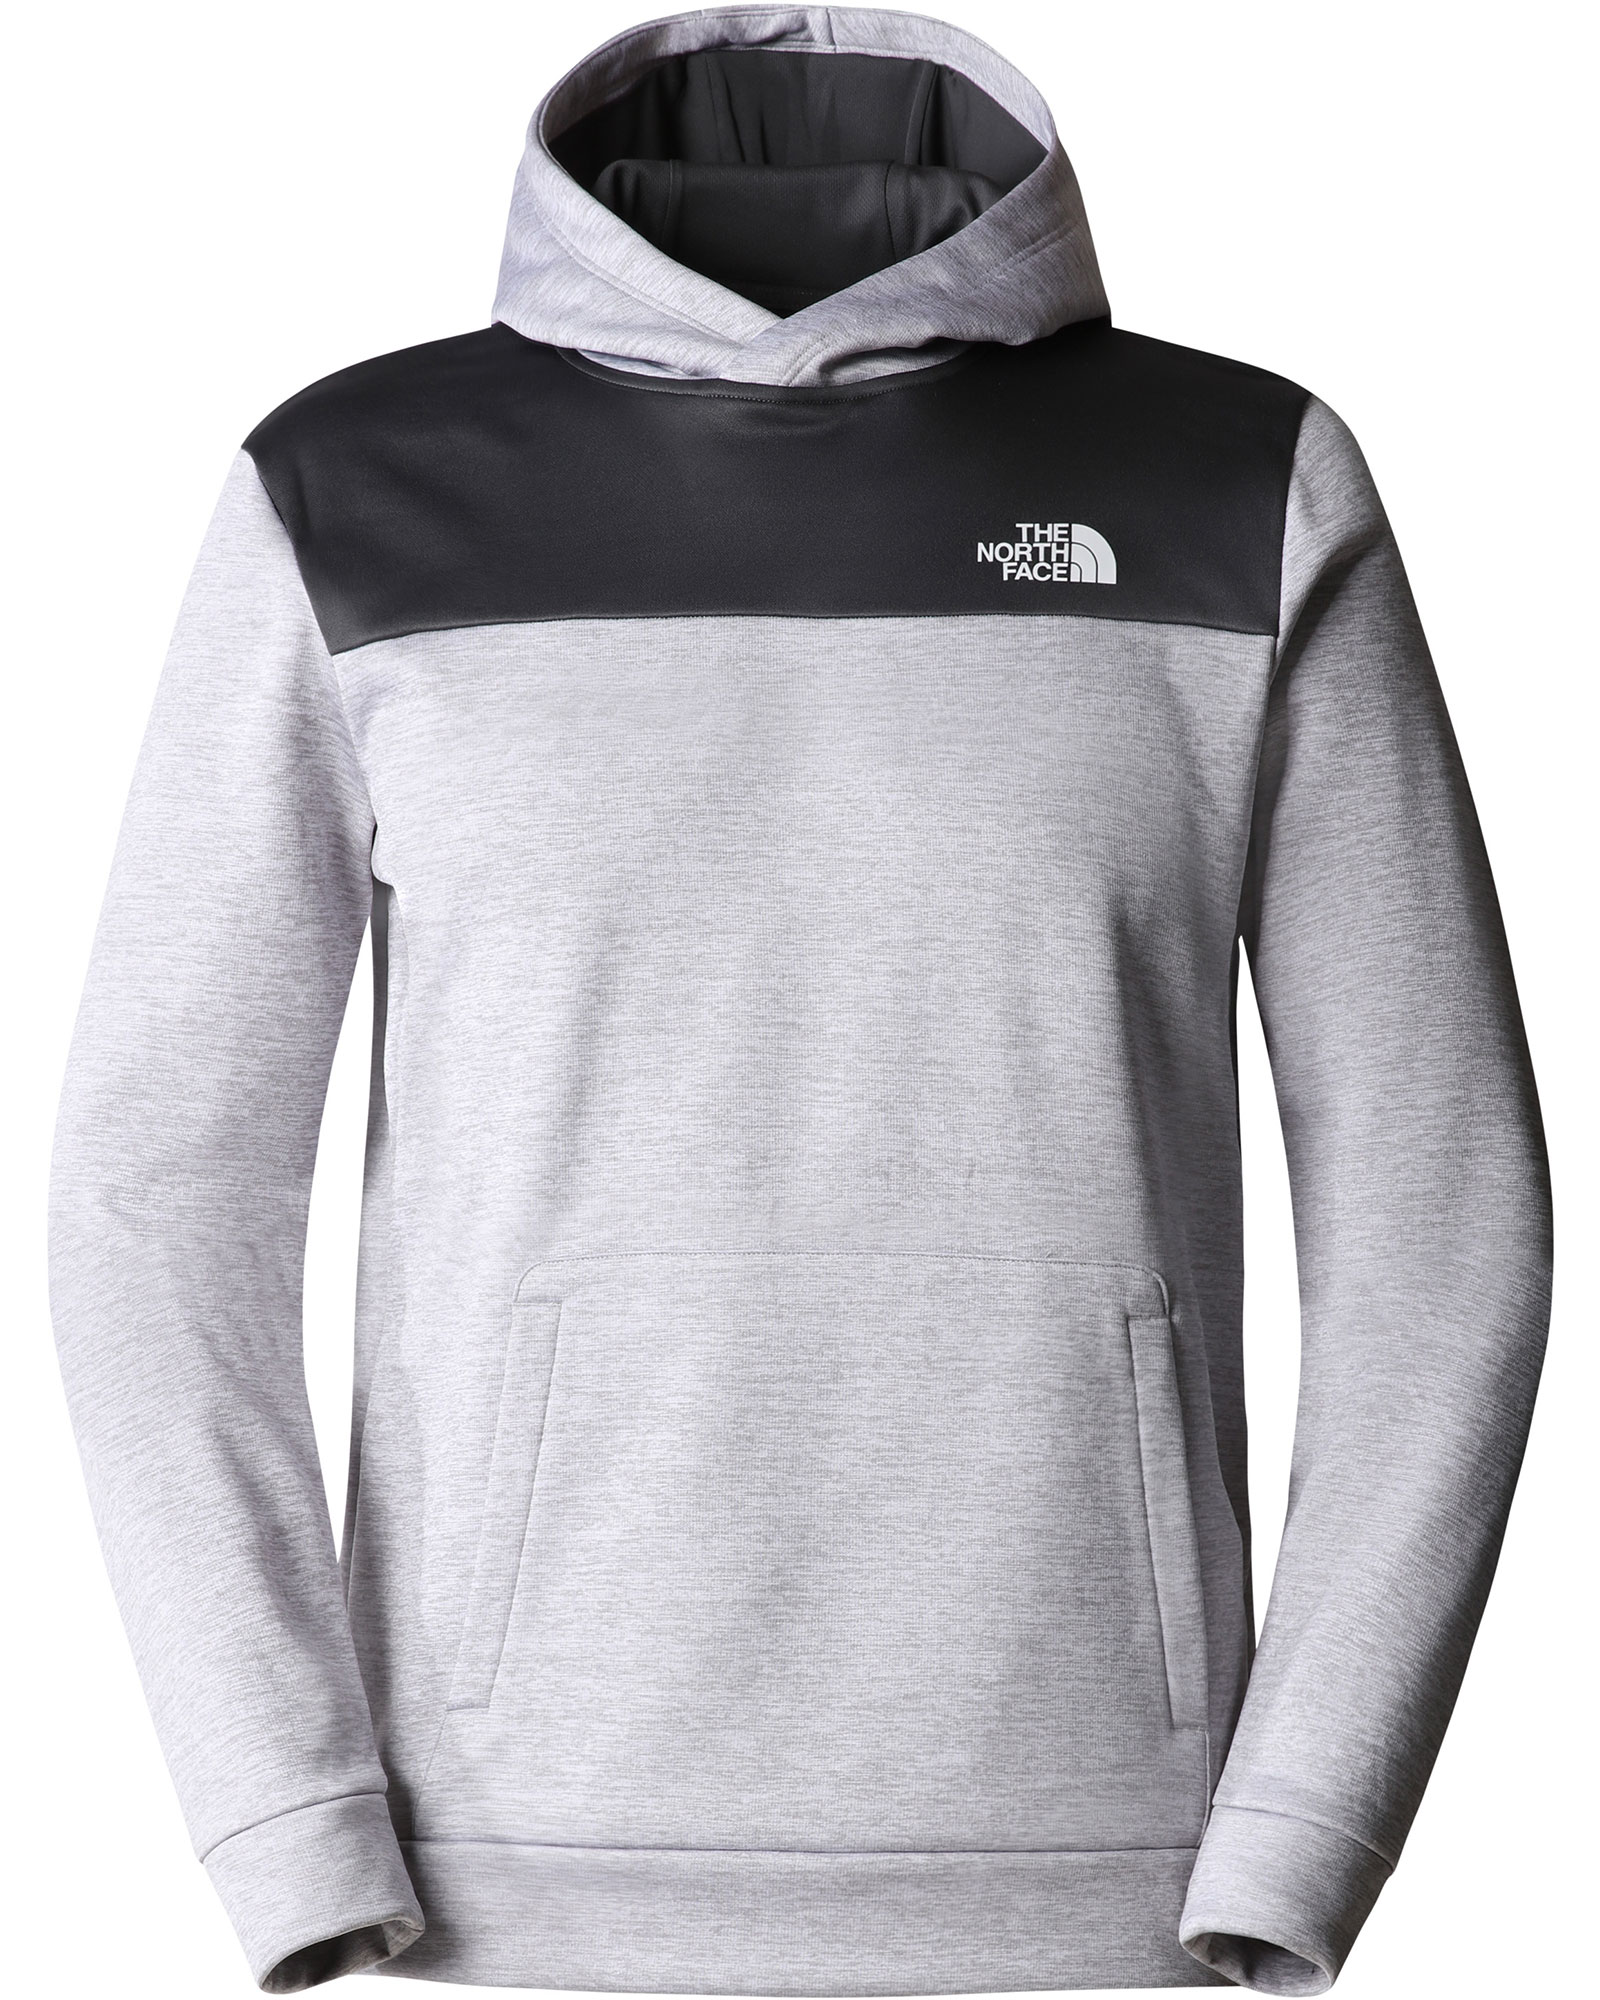 Product image of The North Face Reaxion Fleece Men's Pullover Hoodie